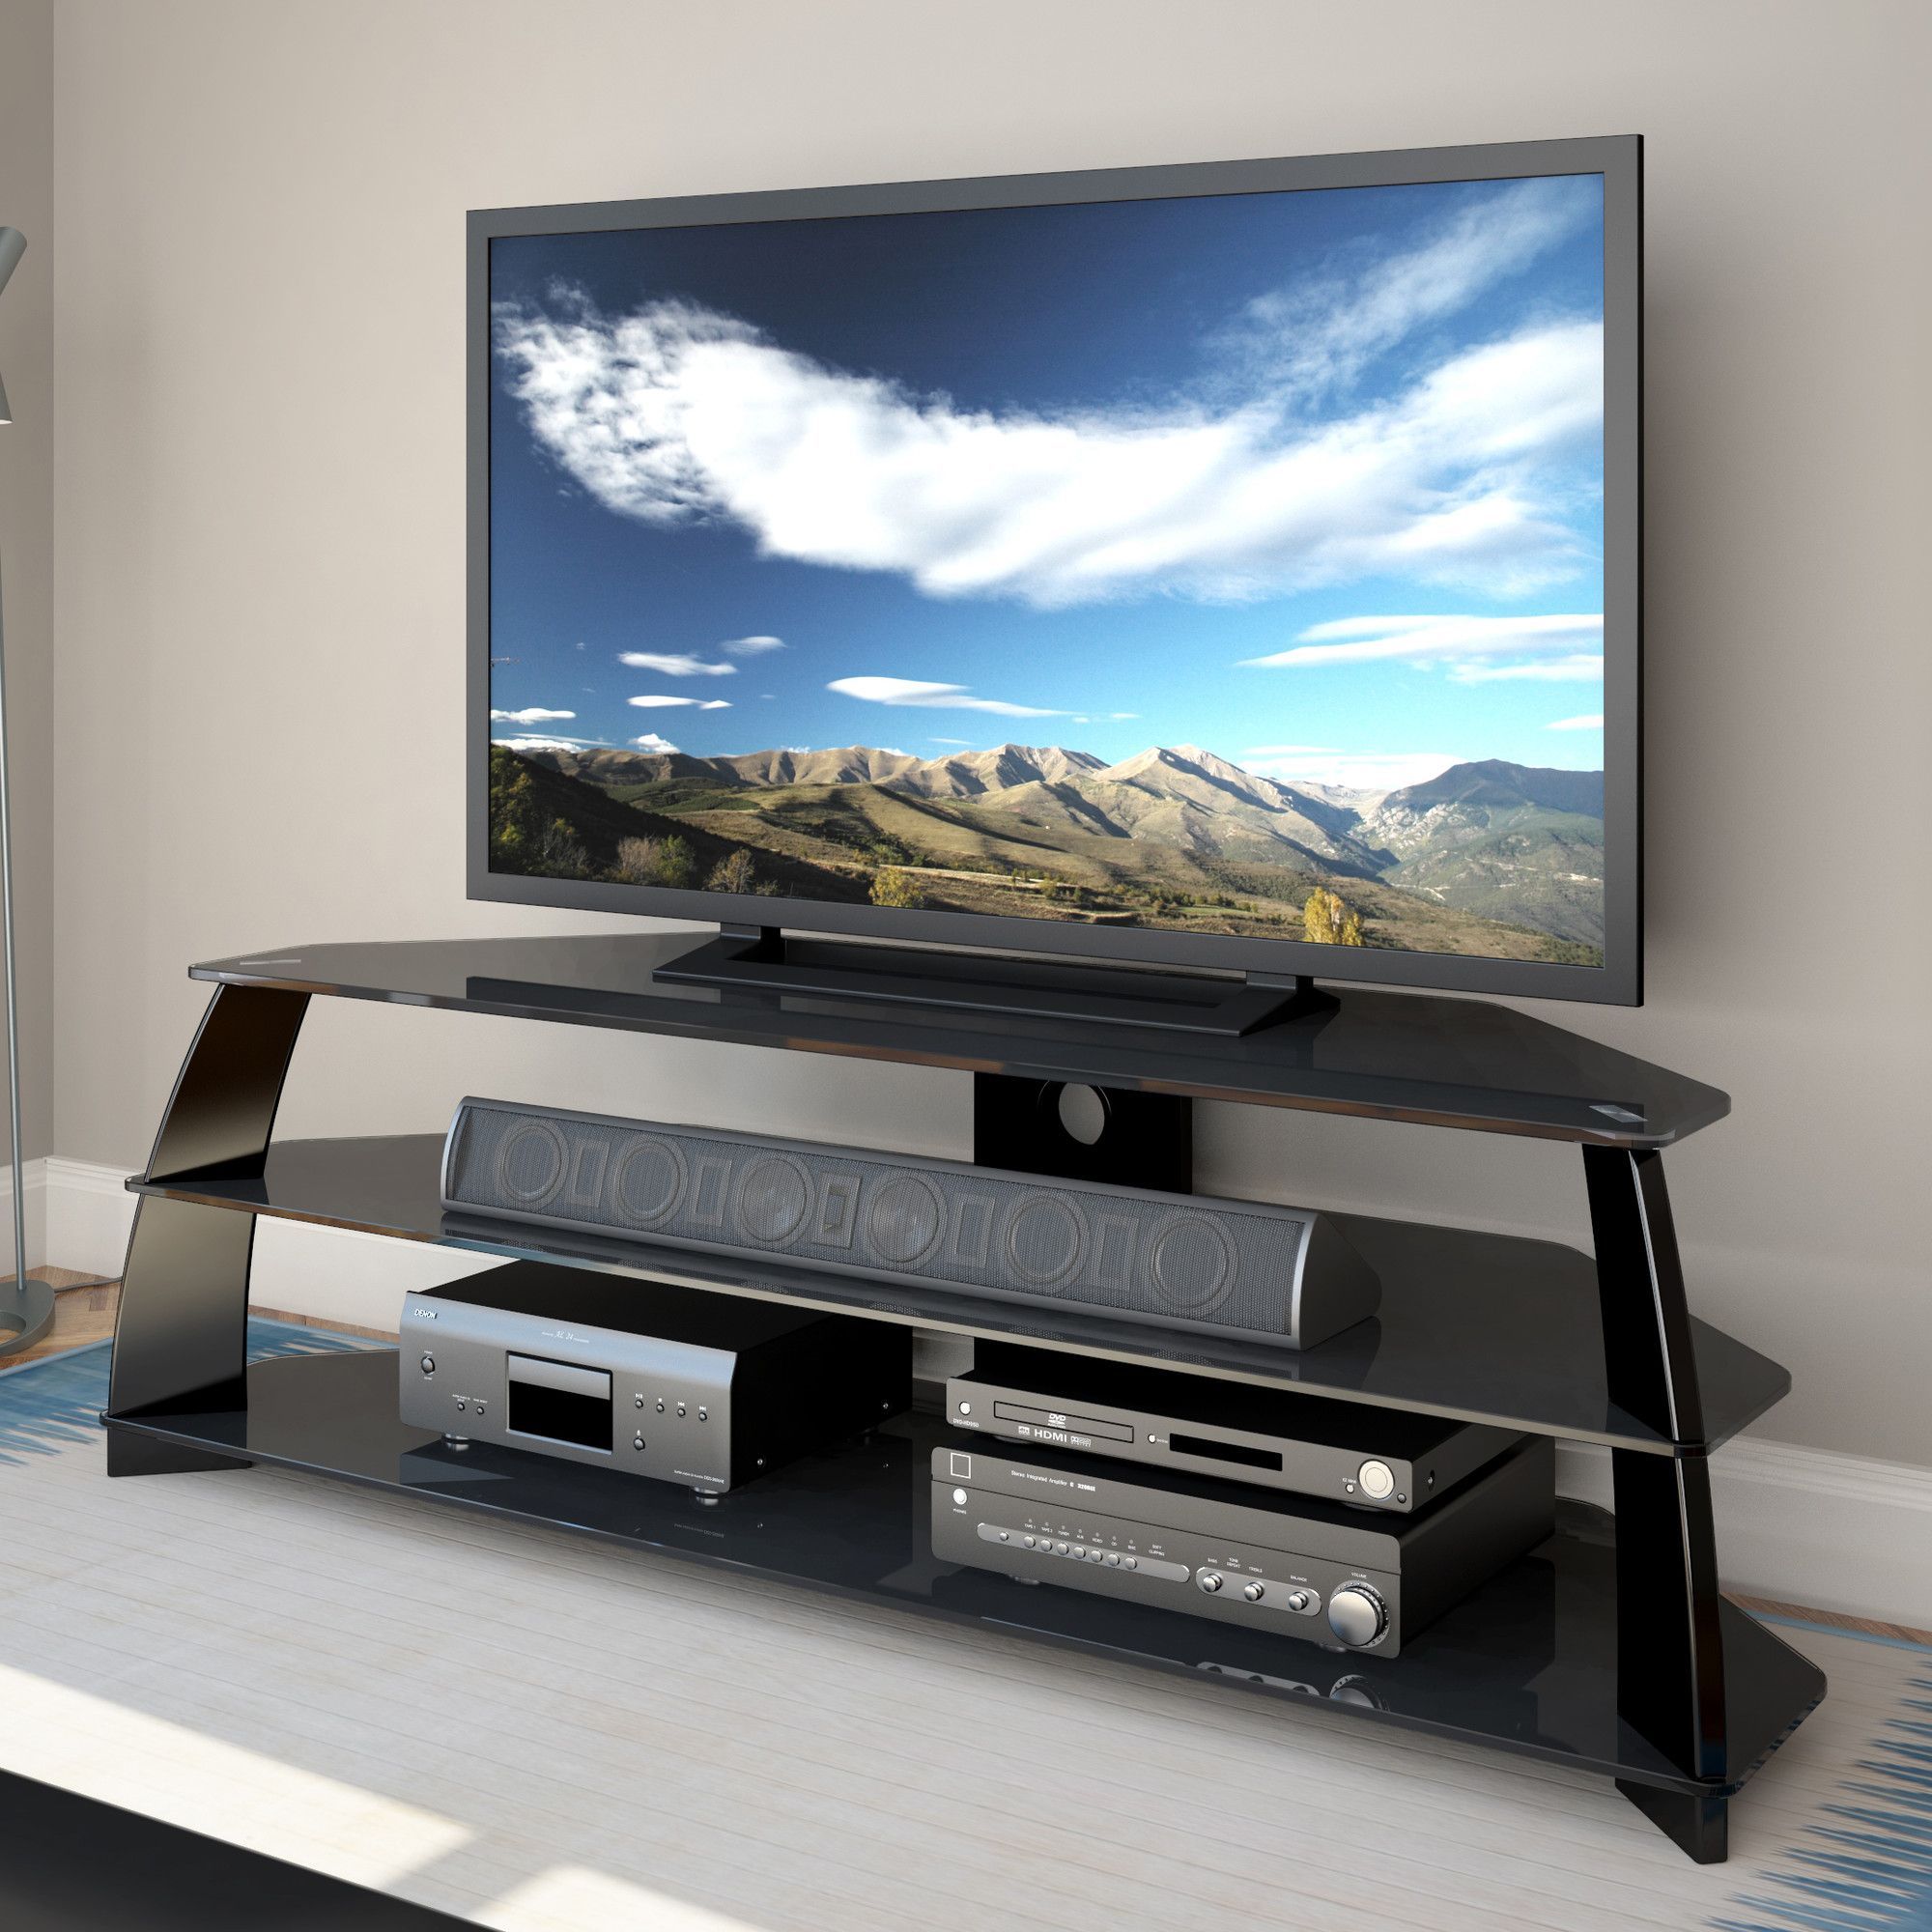 Online Home Store For Furniture, Decor, Outdoors & More Throughout Karon Tv Stands For Tvs Up To 65" (View 10 of 15)